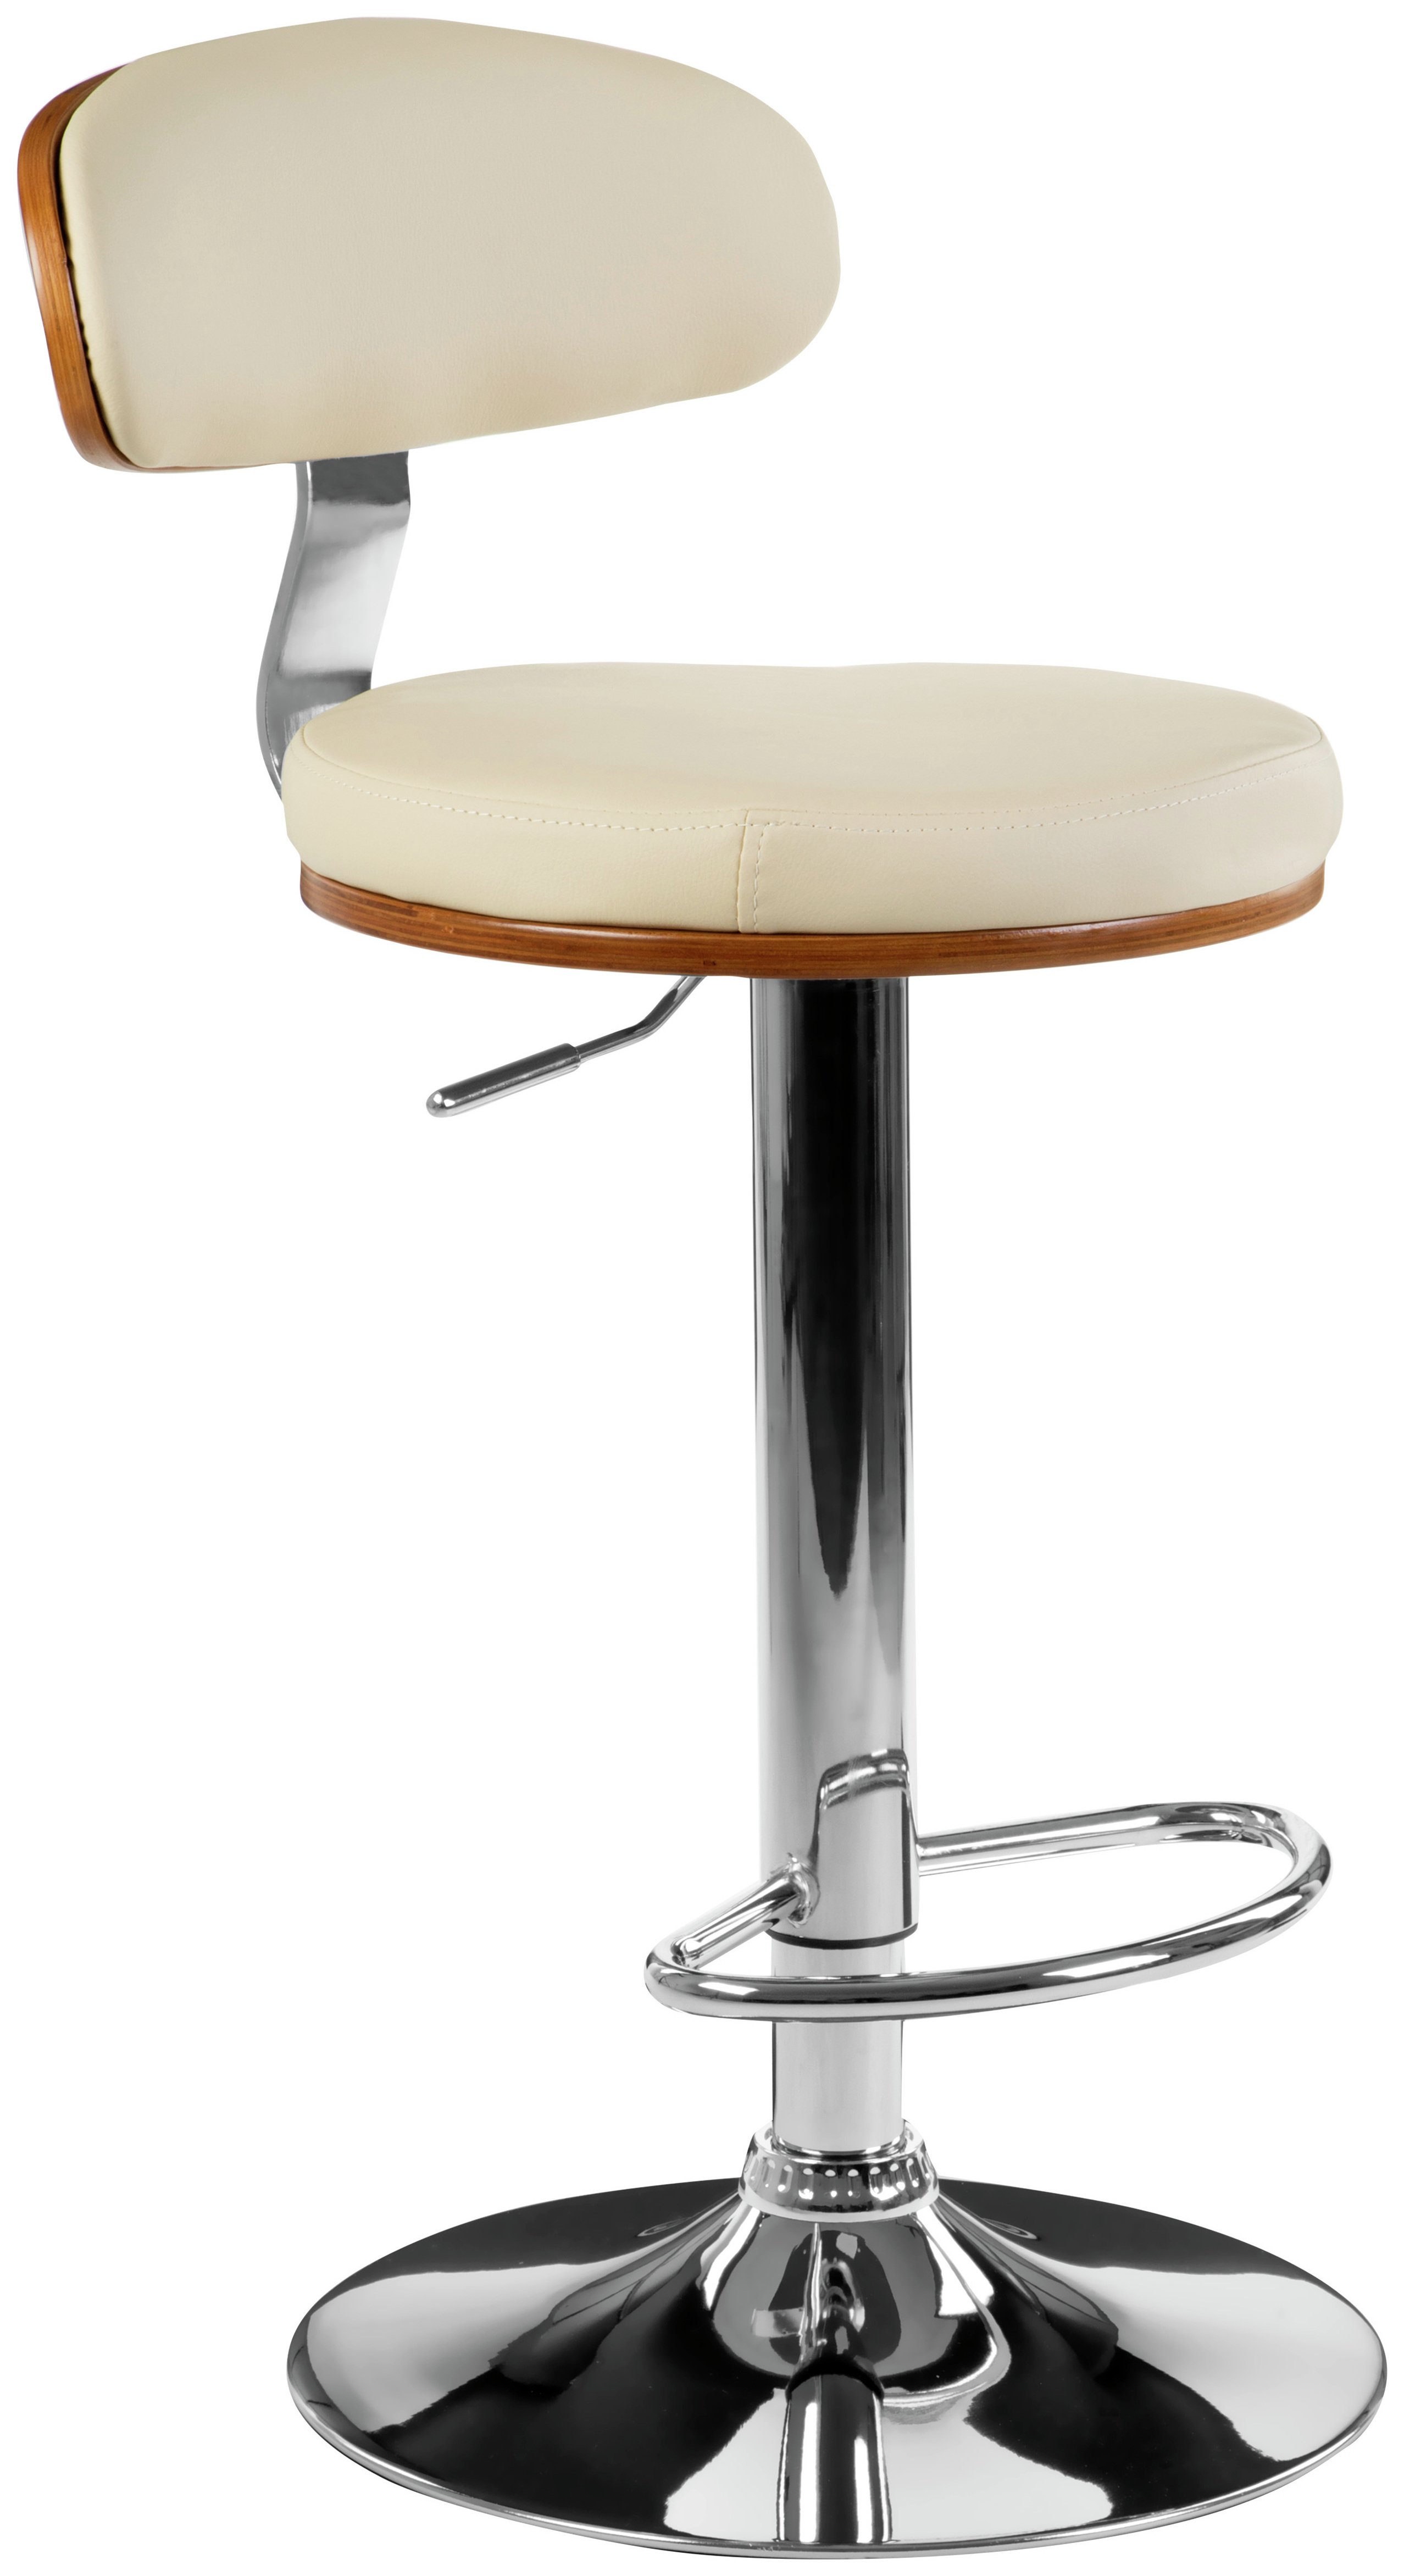 Buy Hygena Bar stools and chairs at Argos.co.uk - Your Online Shop for